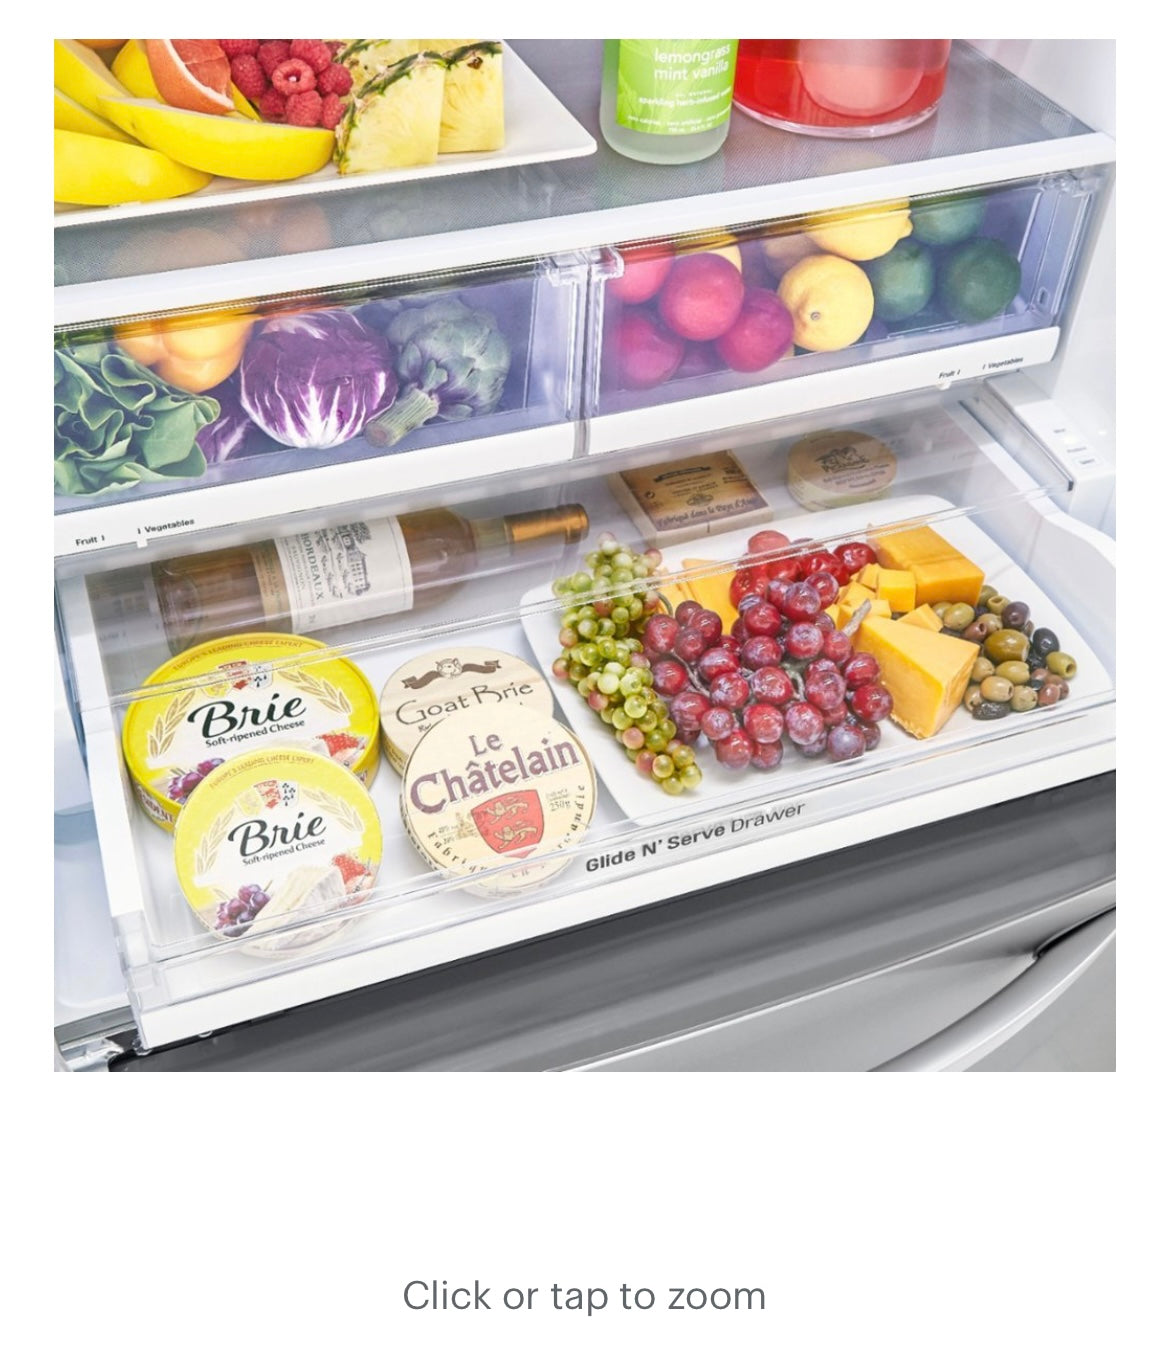 LG - 24.5 Cu. Ft. French Door Smart Refrigerator with External Tall Ice and Water - Stainless Steel